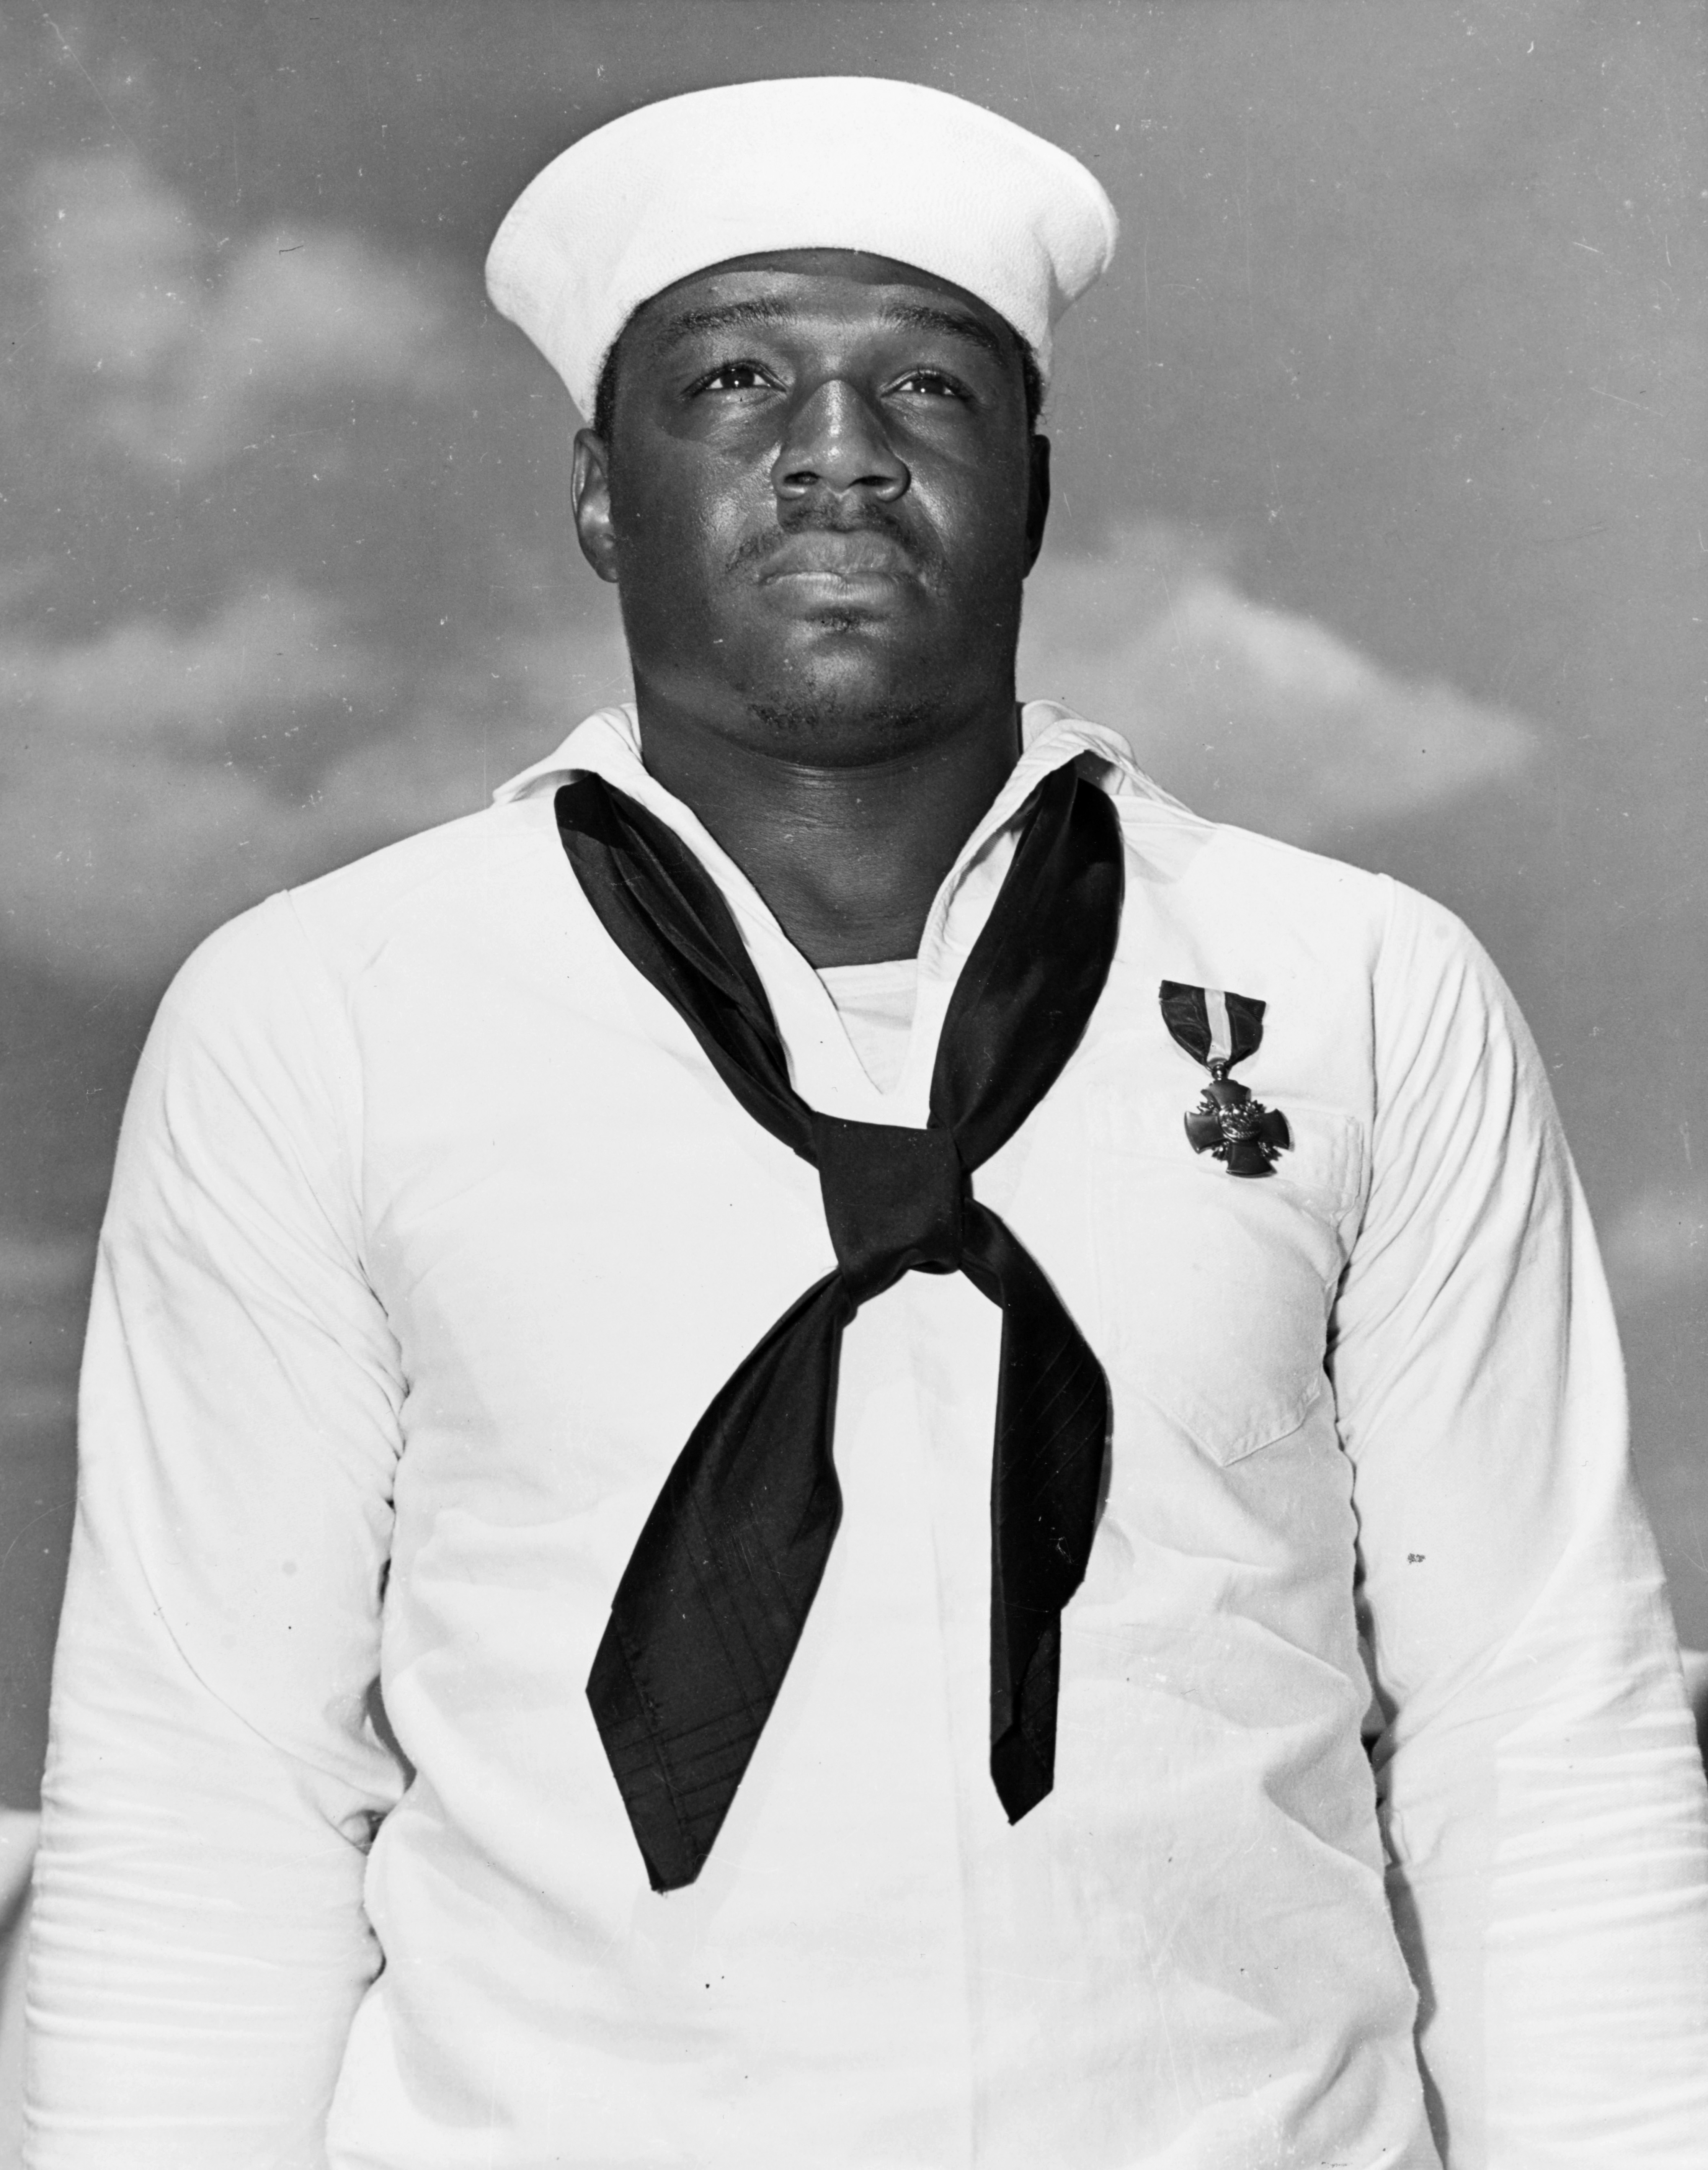 (Jan. 17, 2020) In this file photo taken May 27, 1942, Mess Attendant 2nd Class Doris Miller stands at attention after being awarded the Navy Cross medal for for his actions aboard the battleship USS West Virginia (BB-48) during the Dec. 7, 1941 Japanese attack on Pearl Harbor. The medal was presented to Miller by Adm. Chester Nimitz aboard the aircraft carrier USS Enterprise (CV-6) during a ceremony in Pearl Harbor, Hawaii. (U.S. Navy)